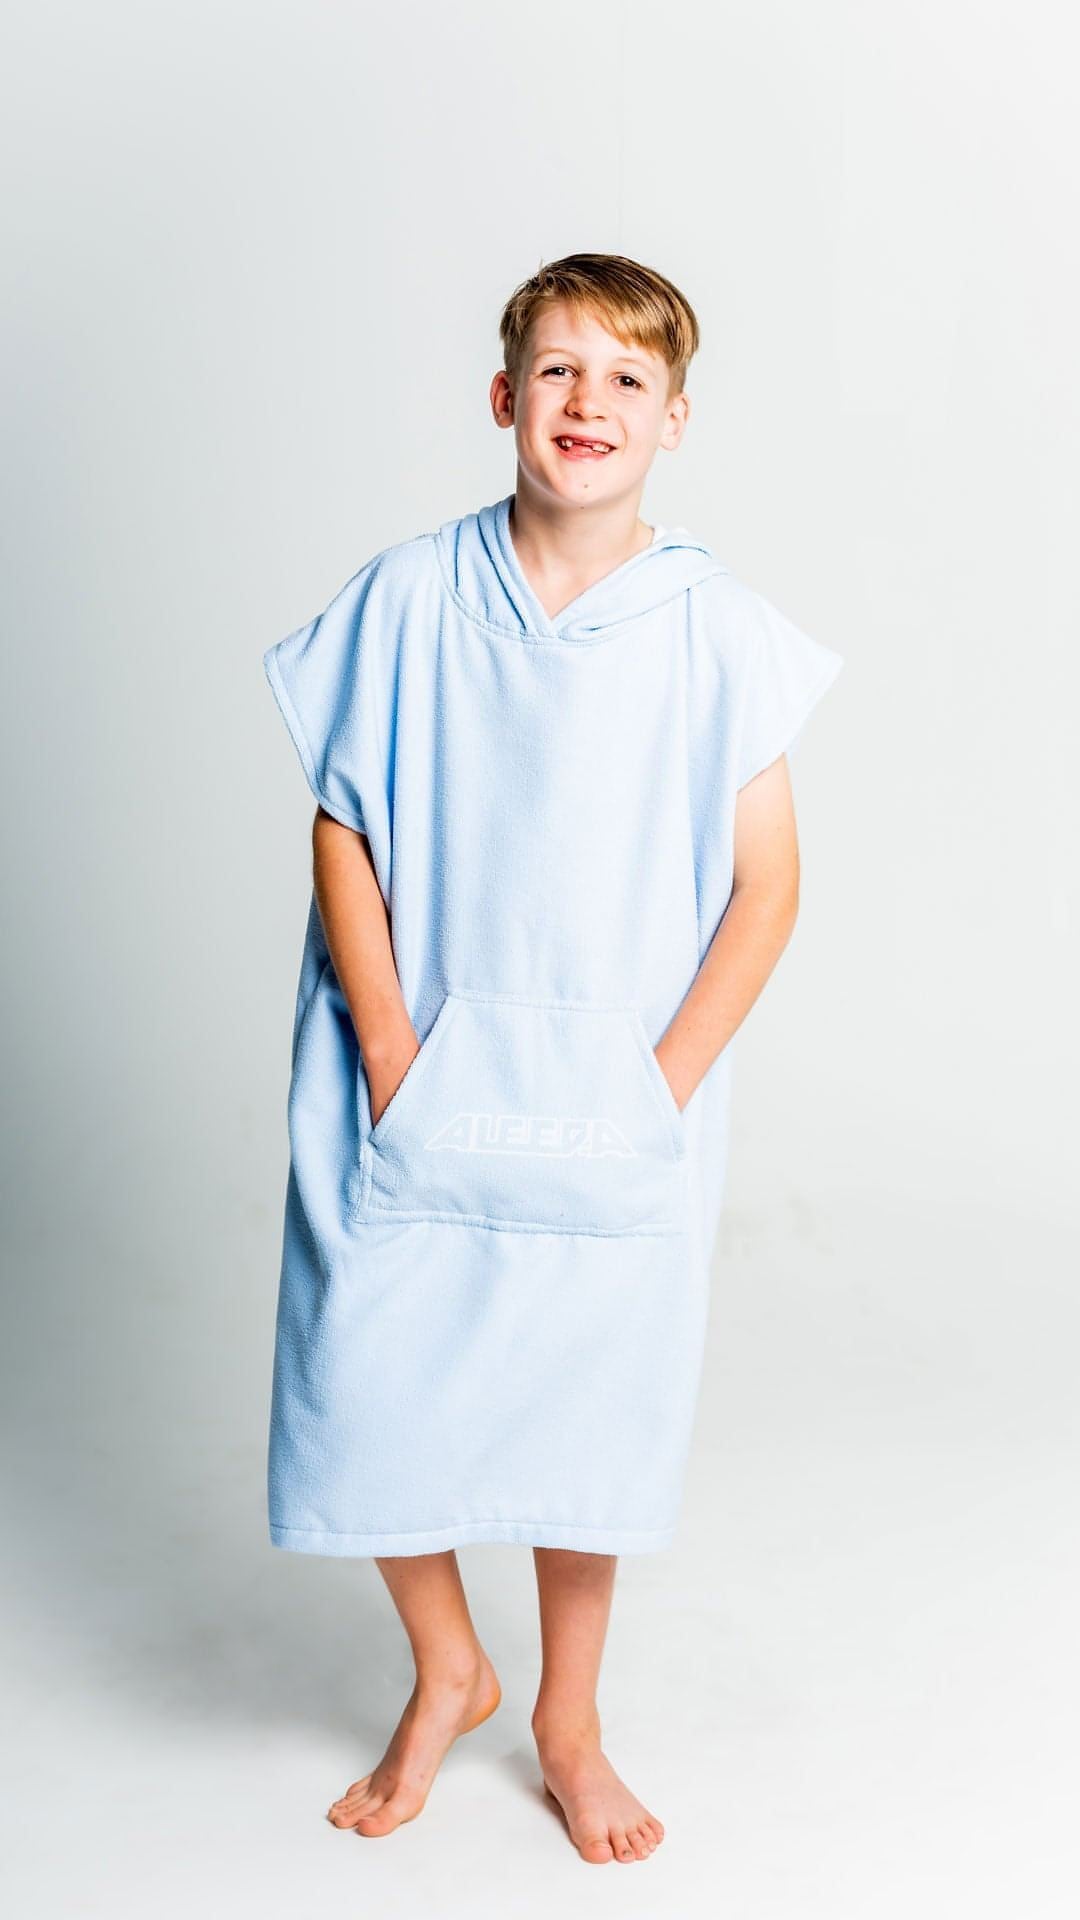 Hooded Towel Youth, Kids, Boys, Girls - Blue front